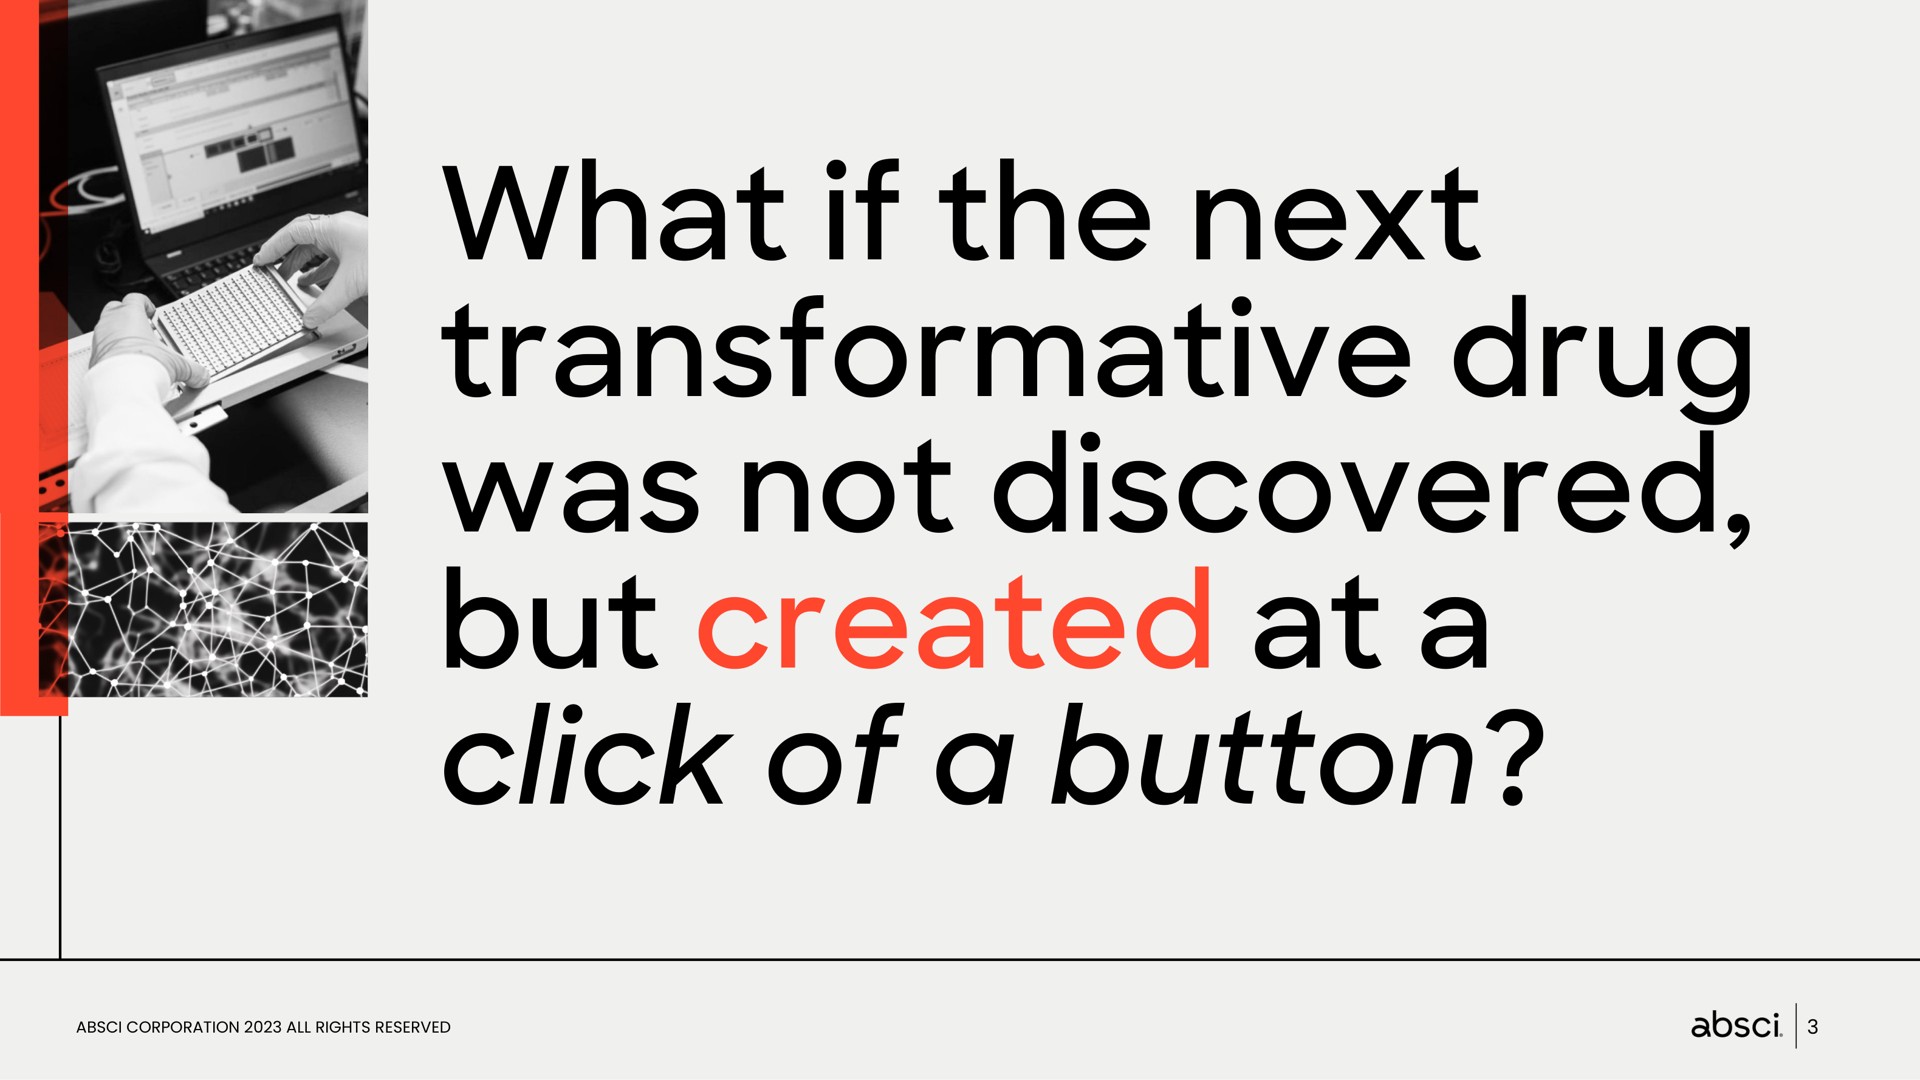 what if the next transformative drug was not discovered but created at a click of a button | Absci